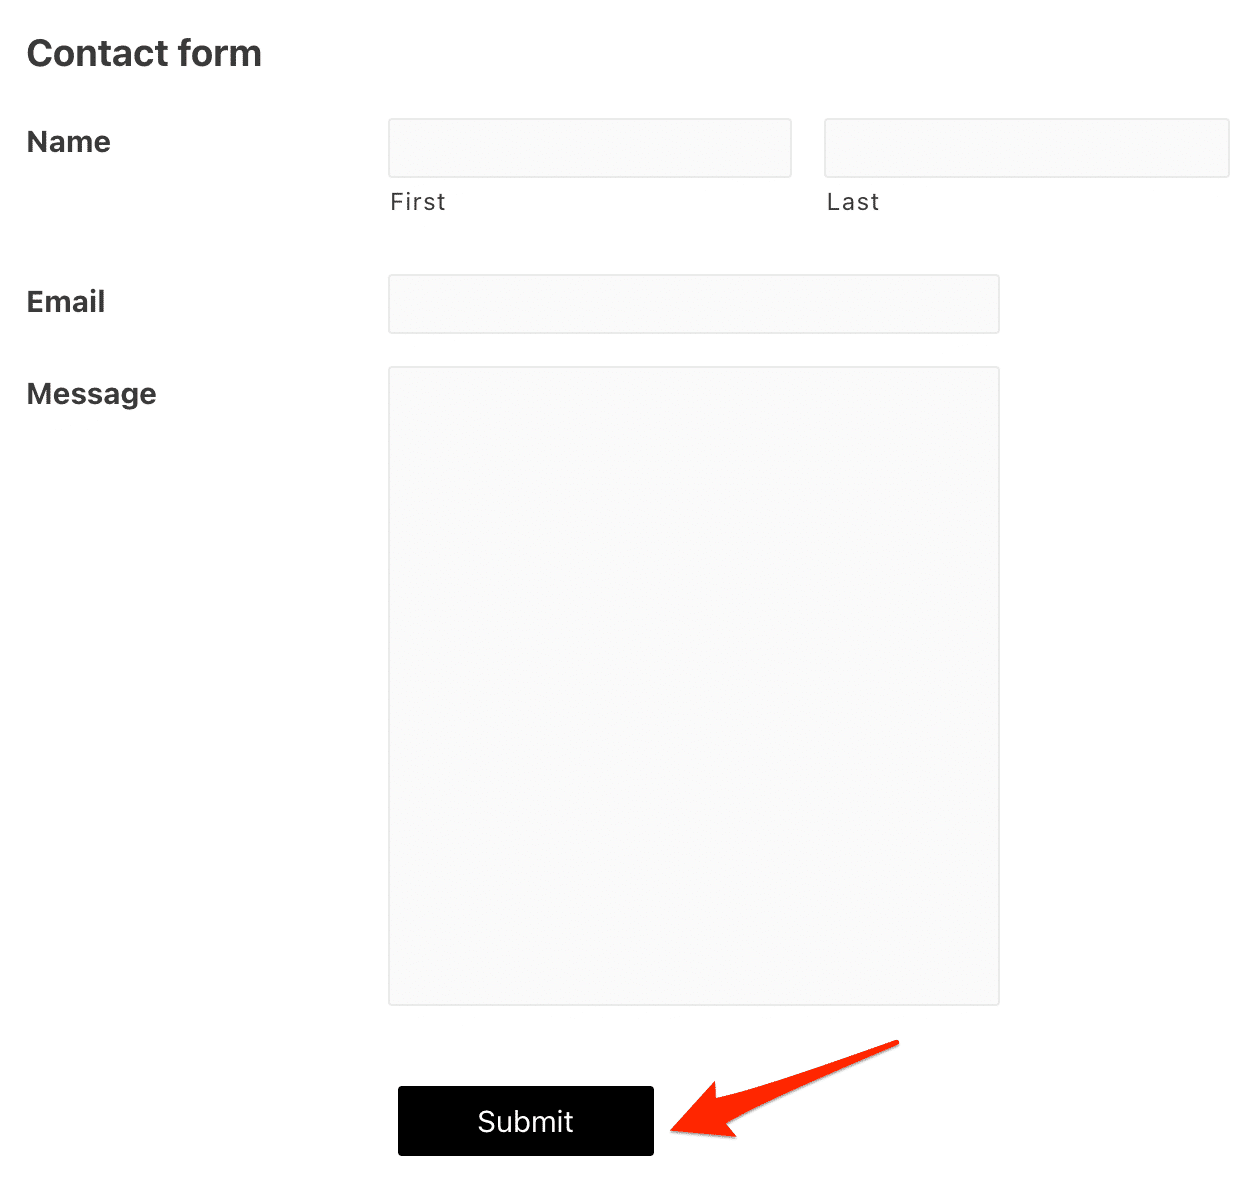 Contact form "Submit" button in black.